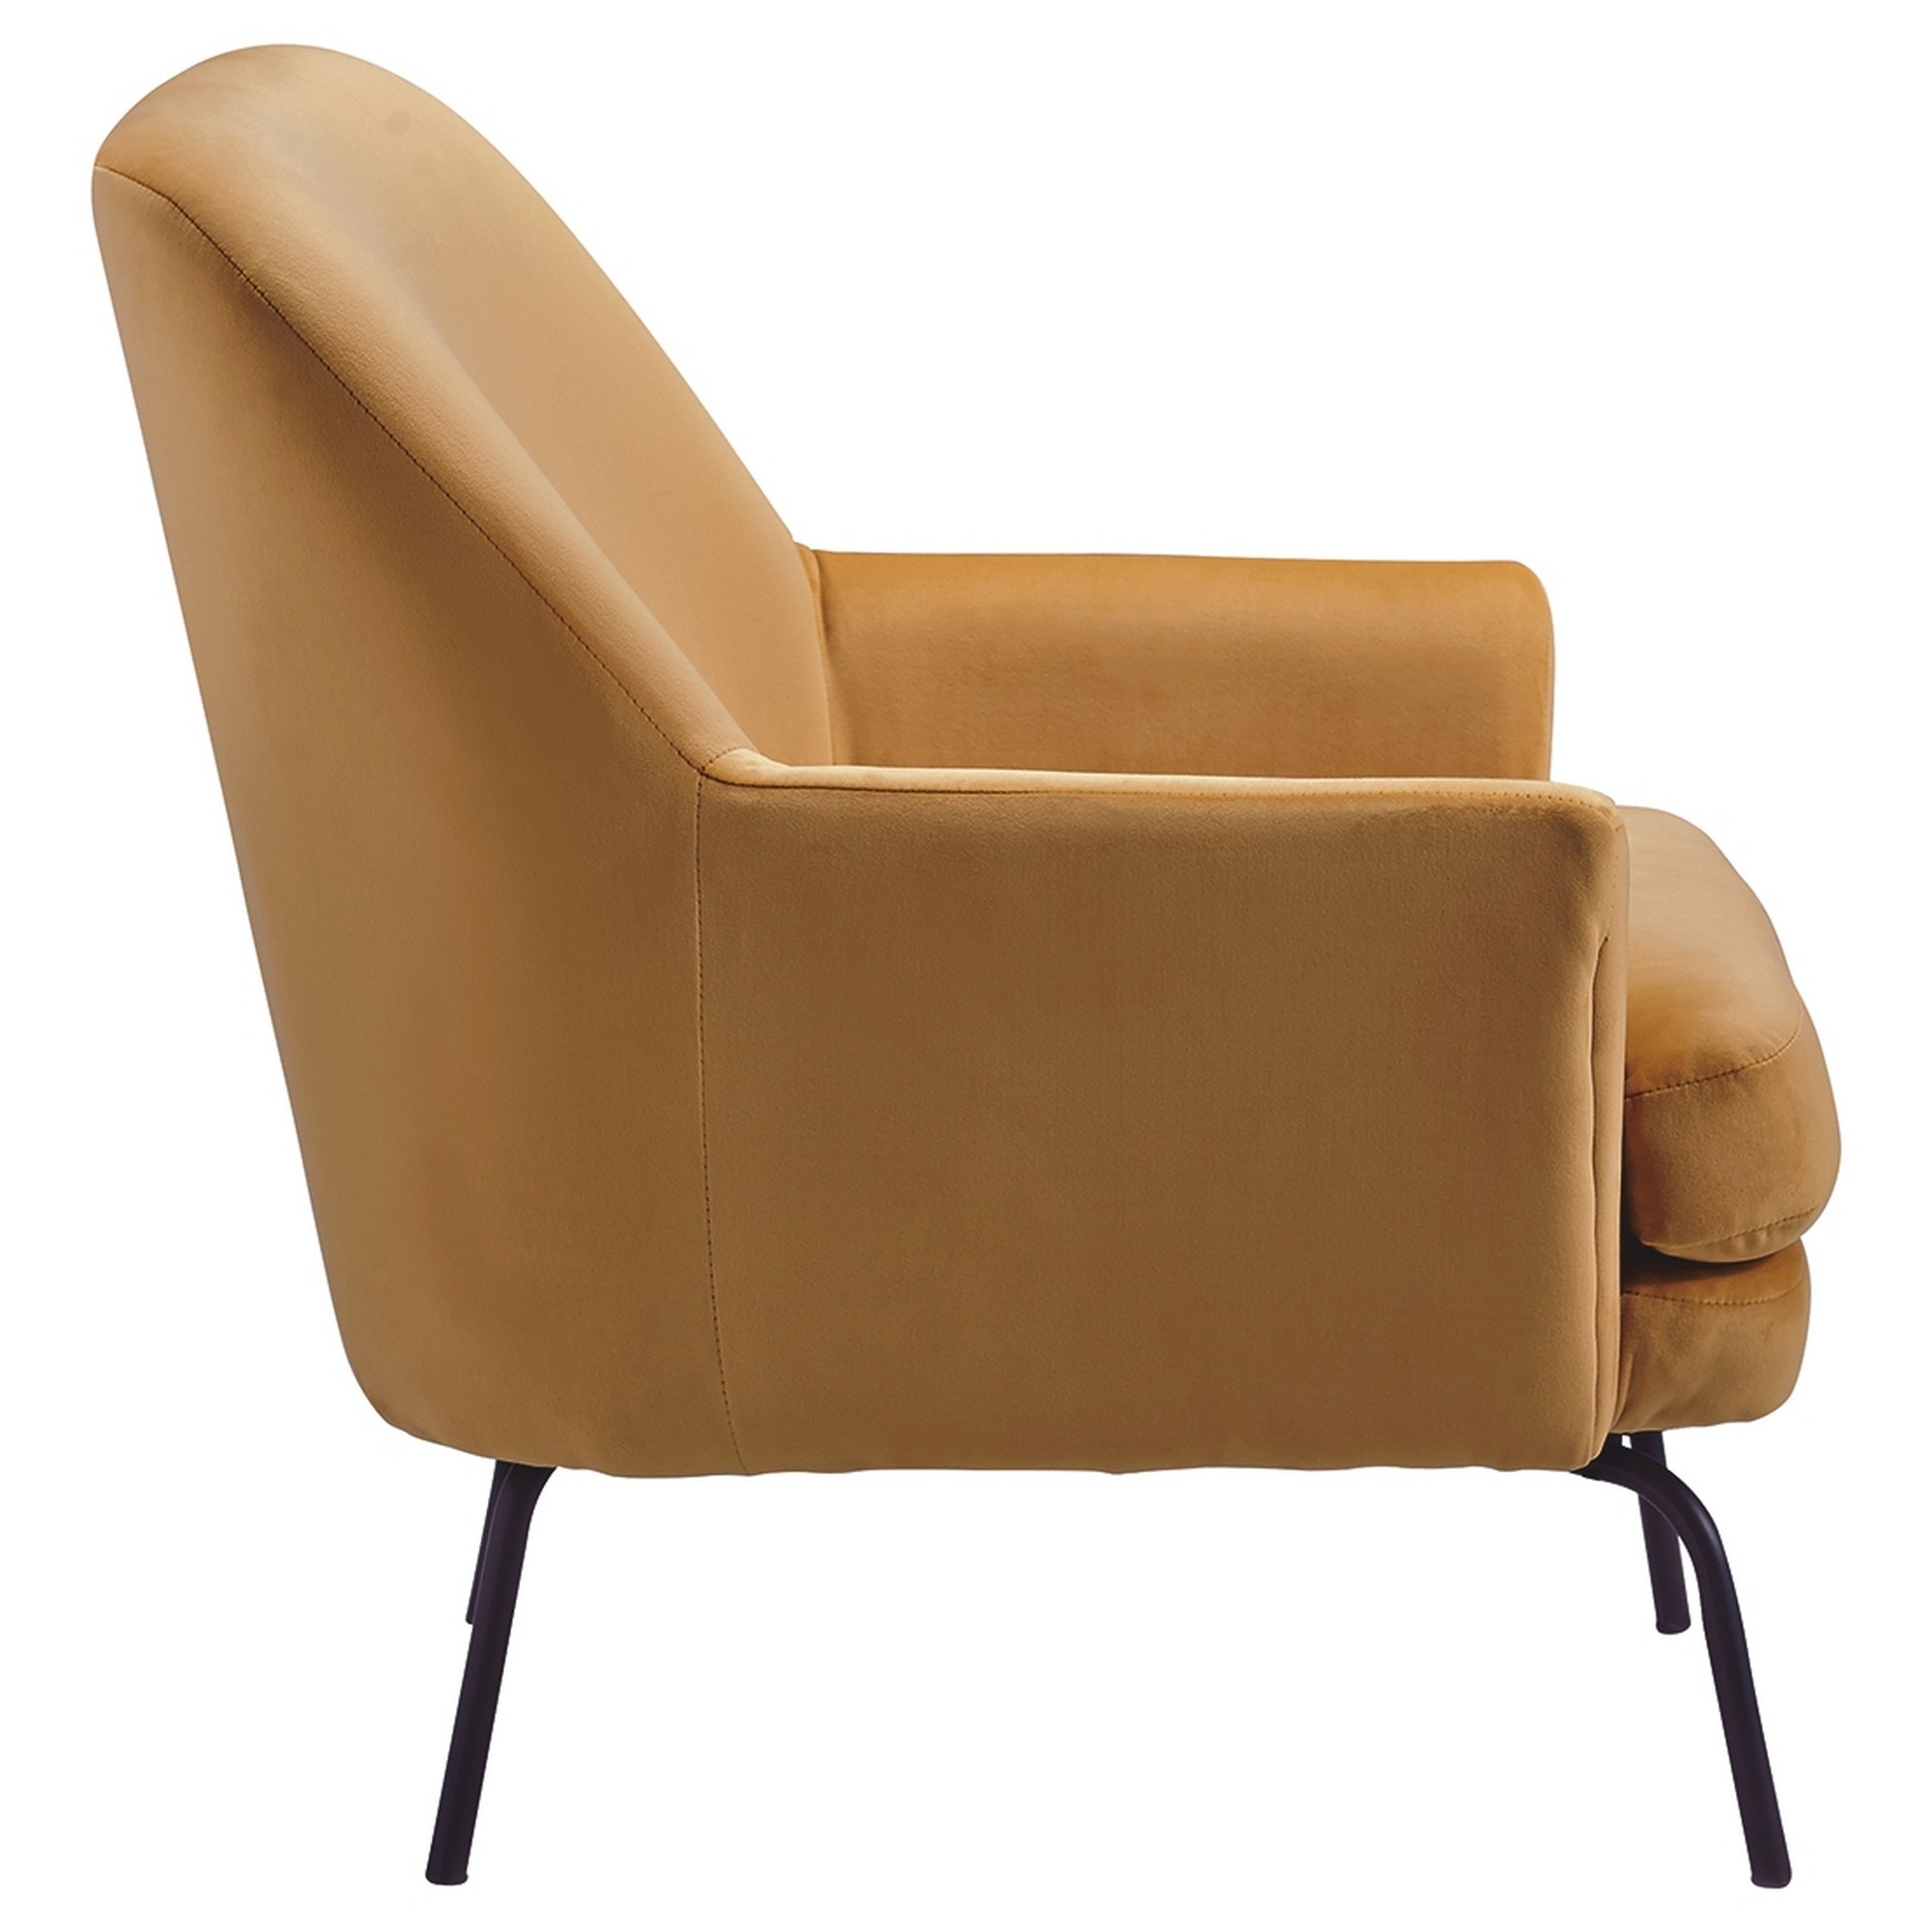 Fabric Accent Chair With Flared Track Arms And Metal Legs, Dark Yellow- Saltoro Sherpi